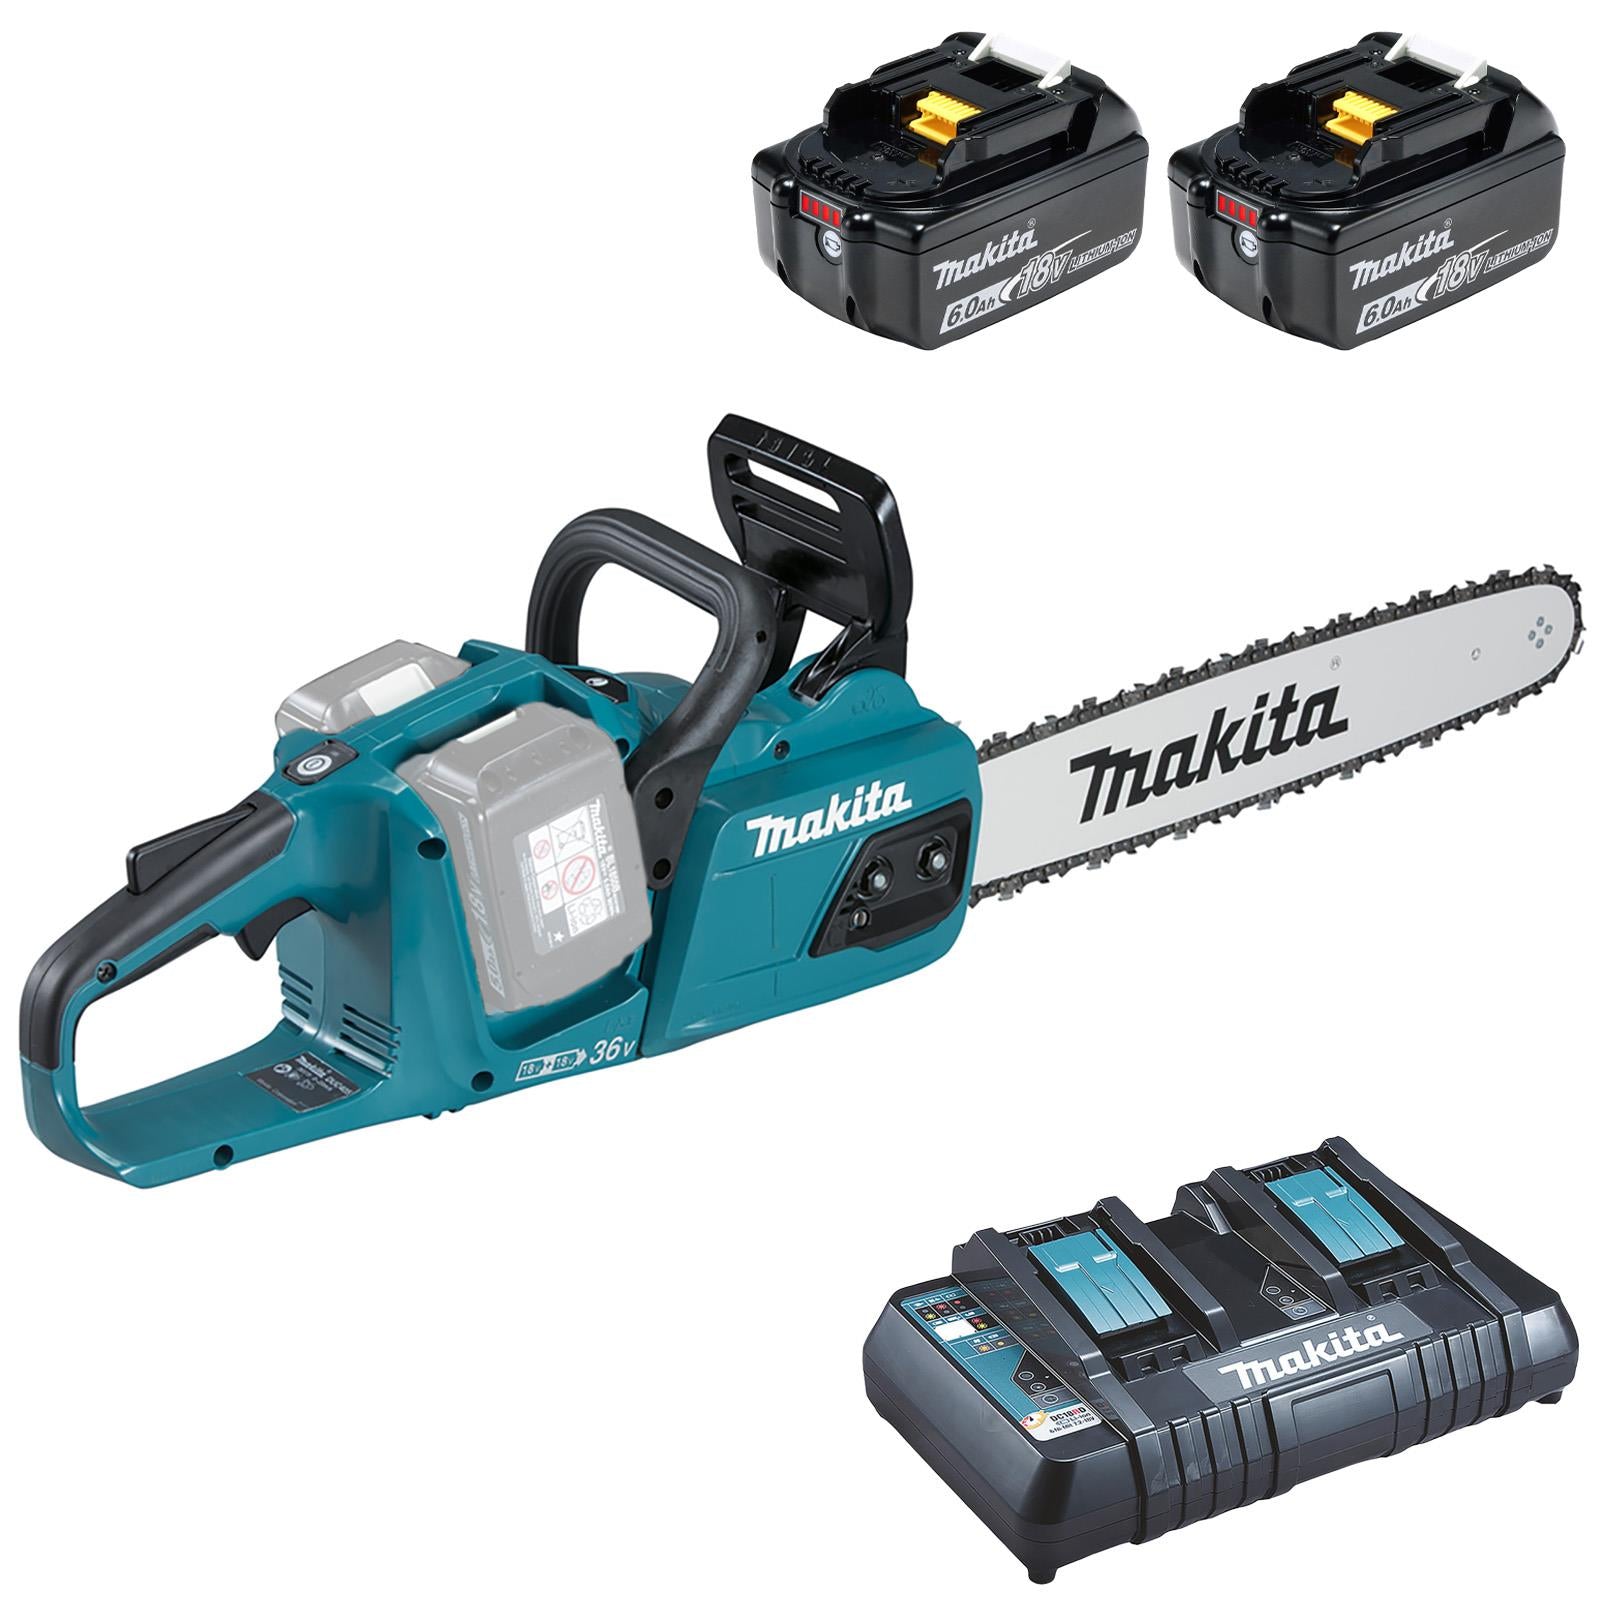 Makita Chainsaw Kit 40cm 16" 18V x 2 LXT Brushless Cordless 2 x 6Ah Battery and Dual Rapid Charger Garden Tree Cutting Pruning DUC405PG2